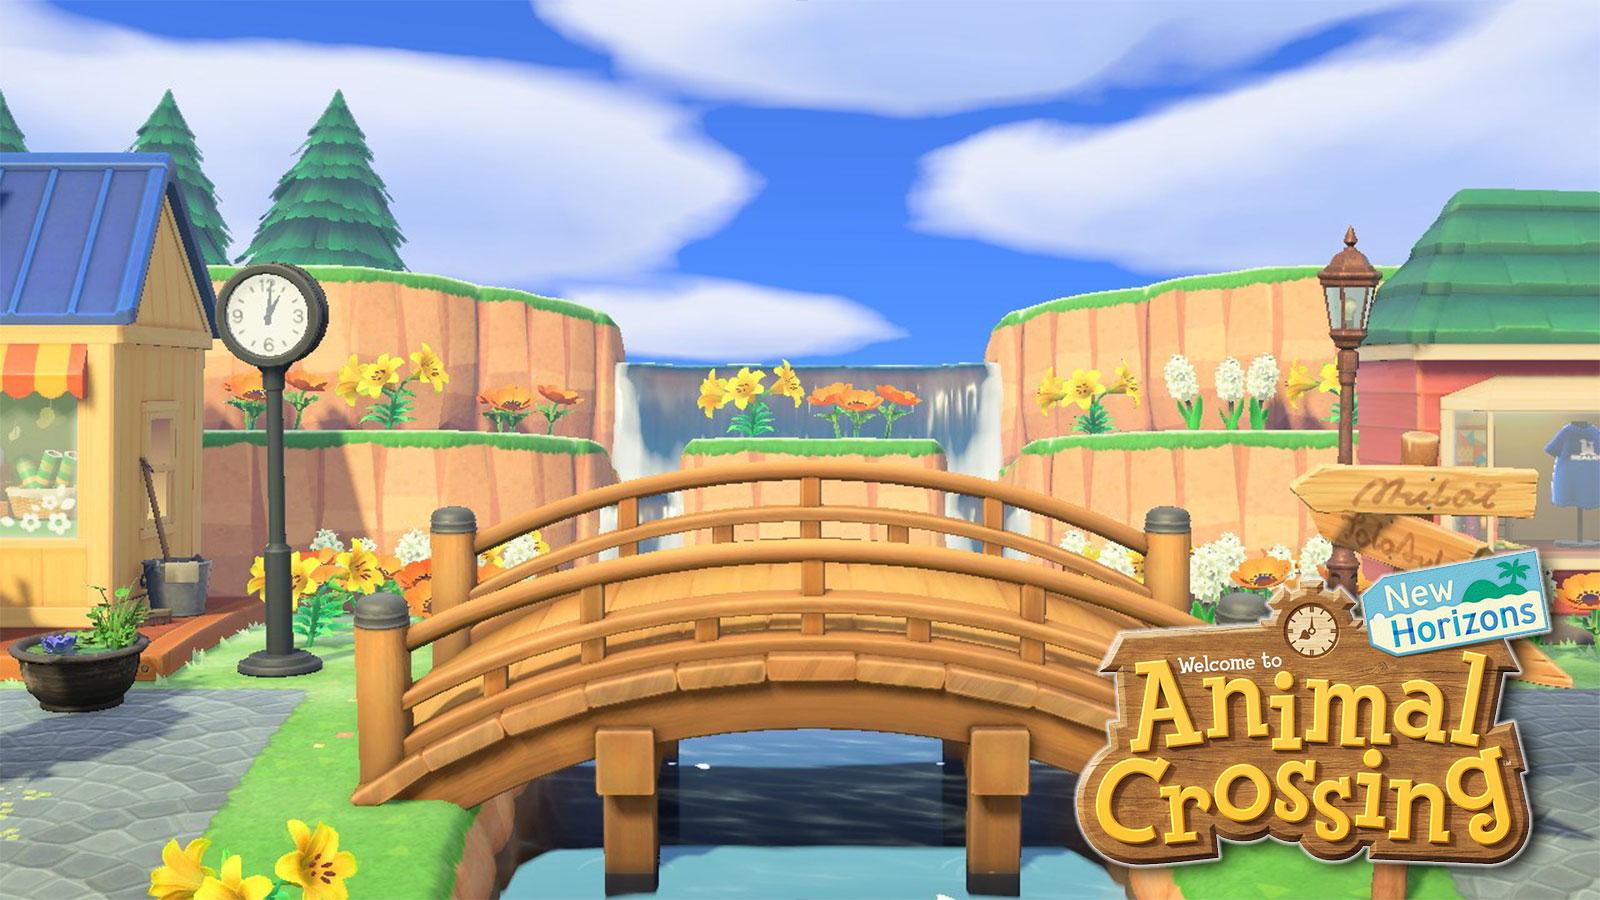 Best way to plan your island layout in Animal Crossing: New